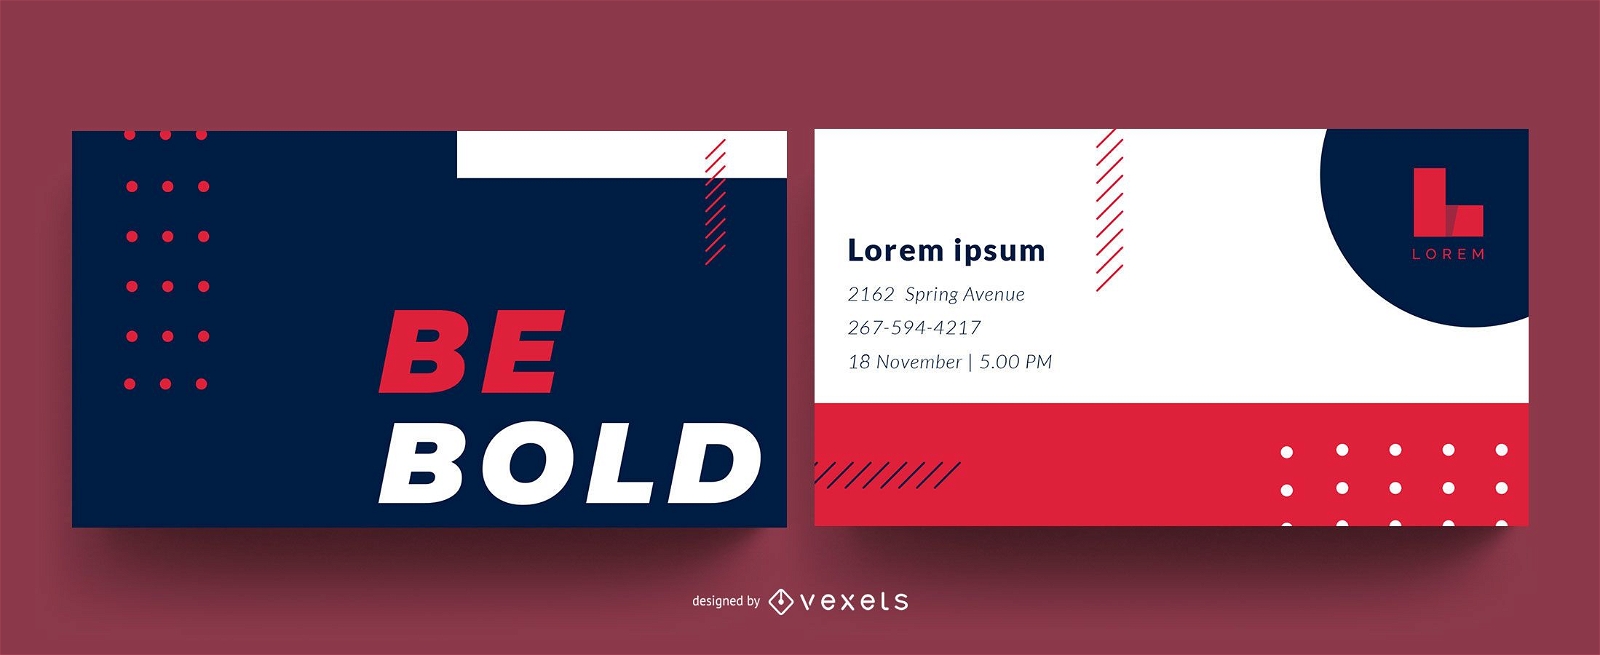 Be bold business card design